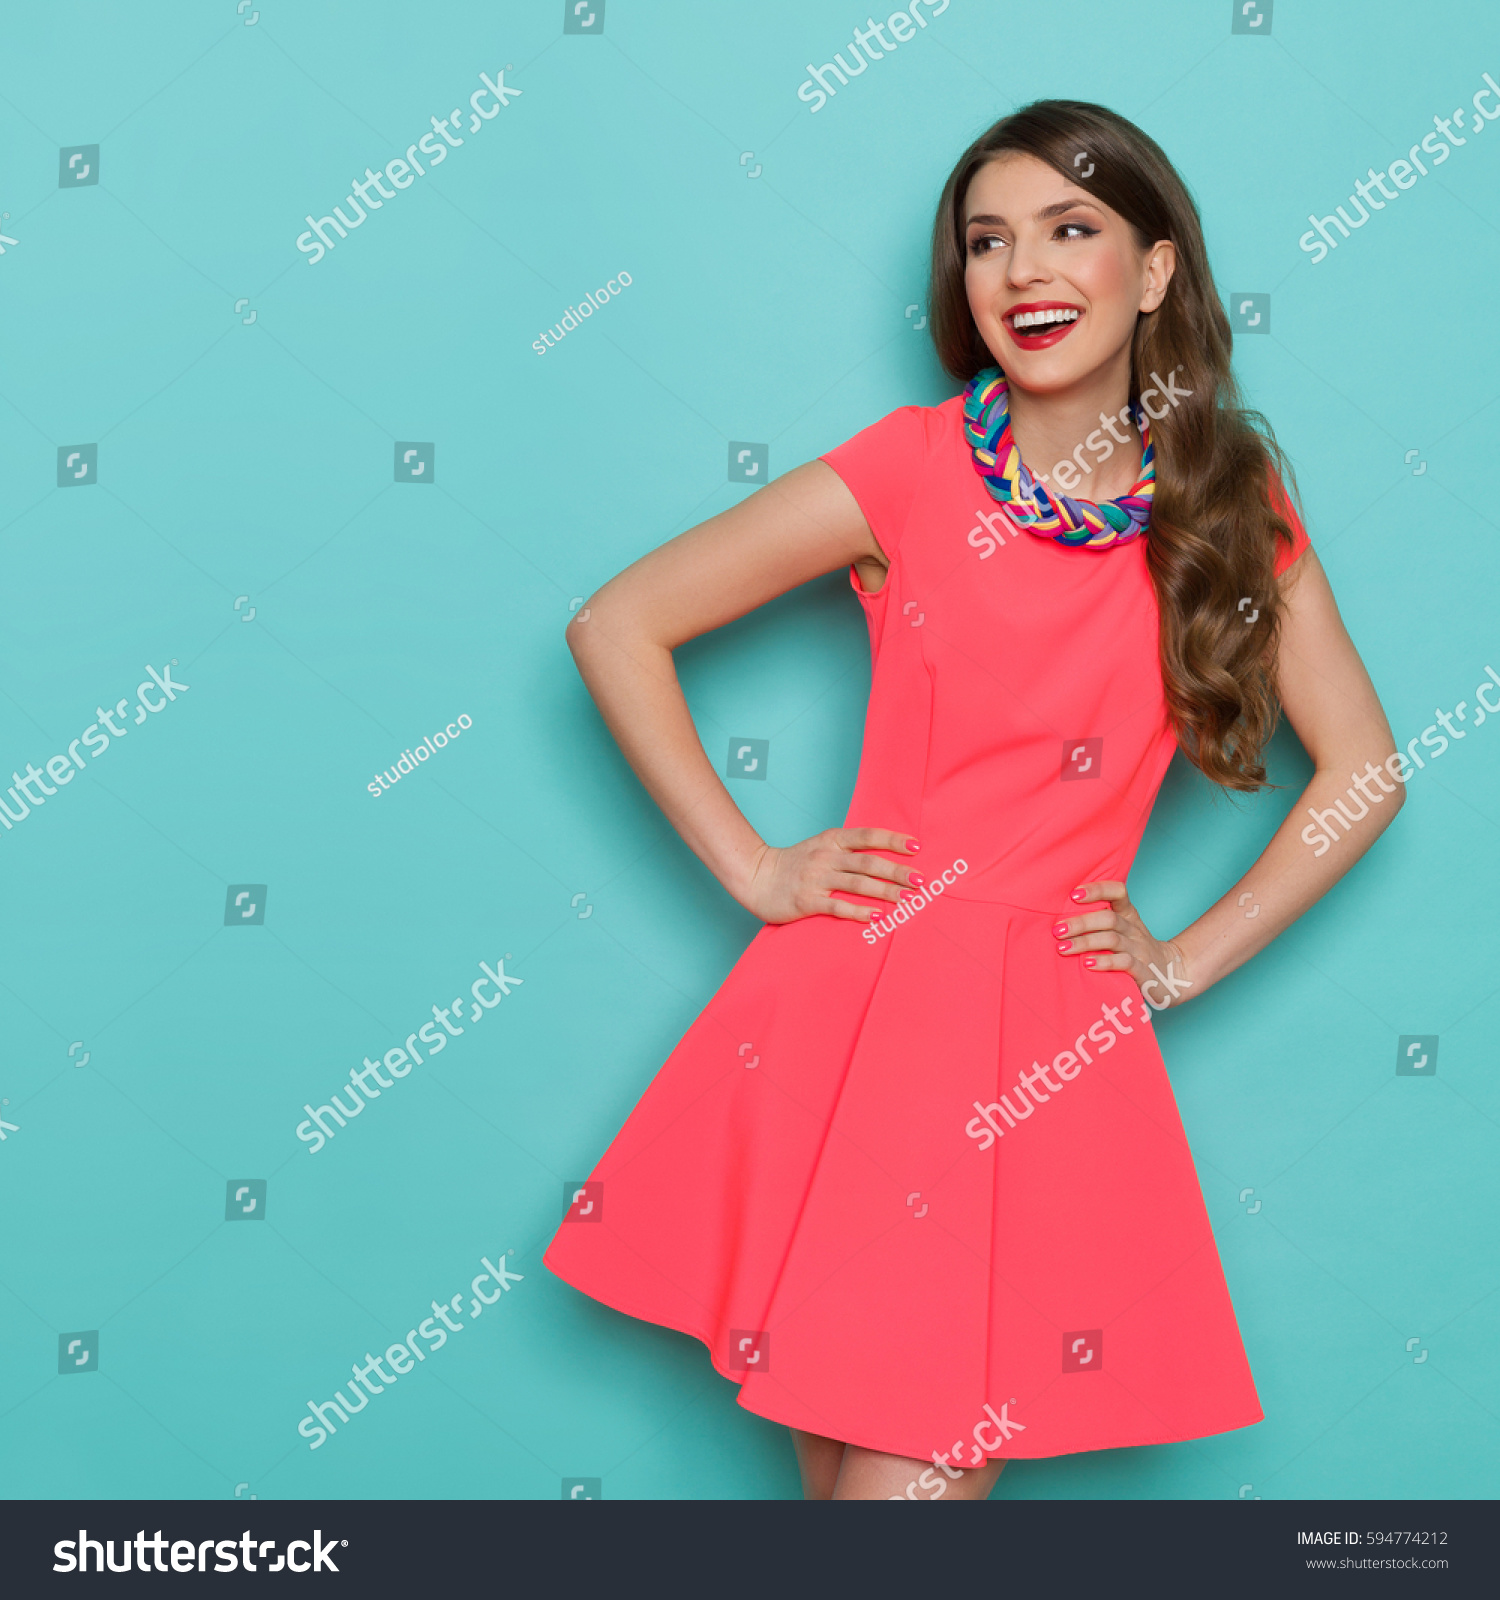 Amused beautiful young woman in pink mini dress posing with hand on hip and looking away. Three quarter length studio shot on turquoise background. #594774212